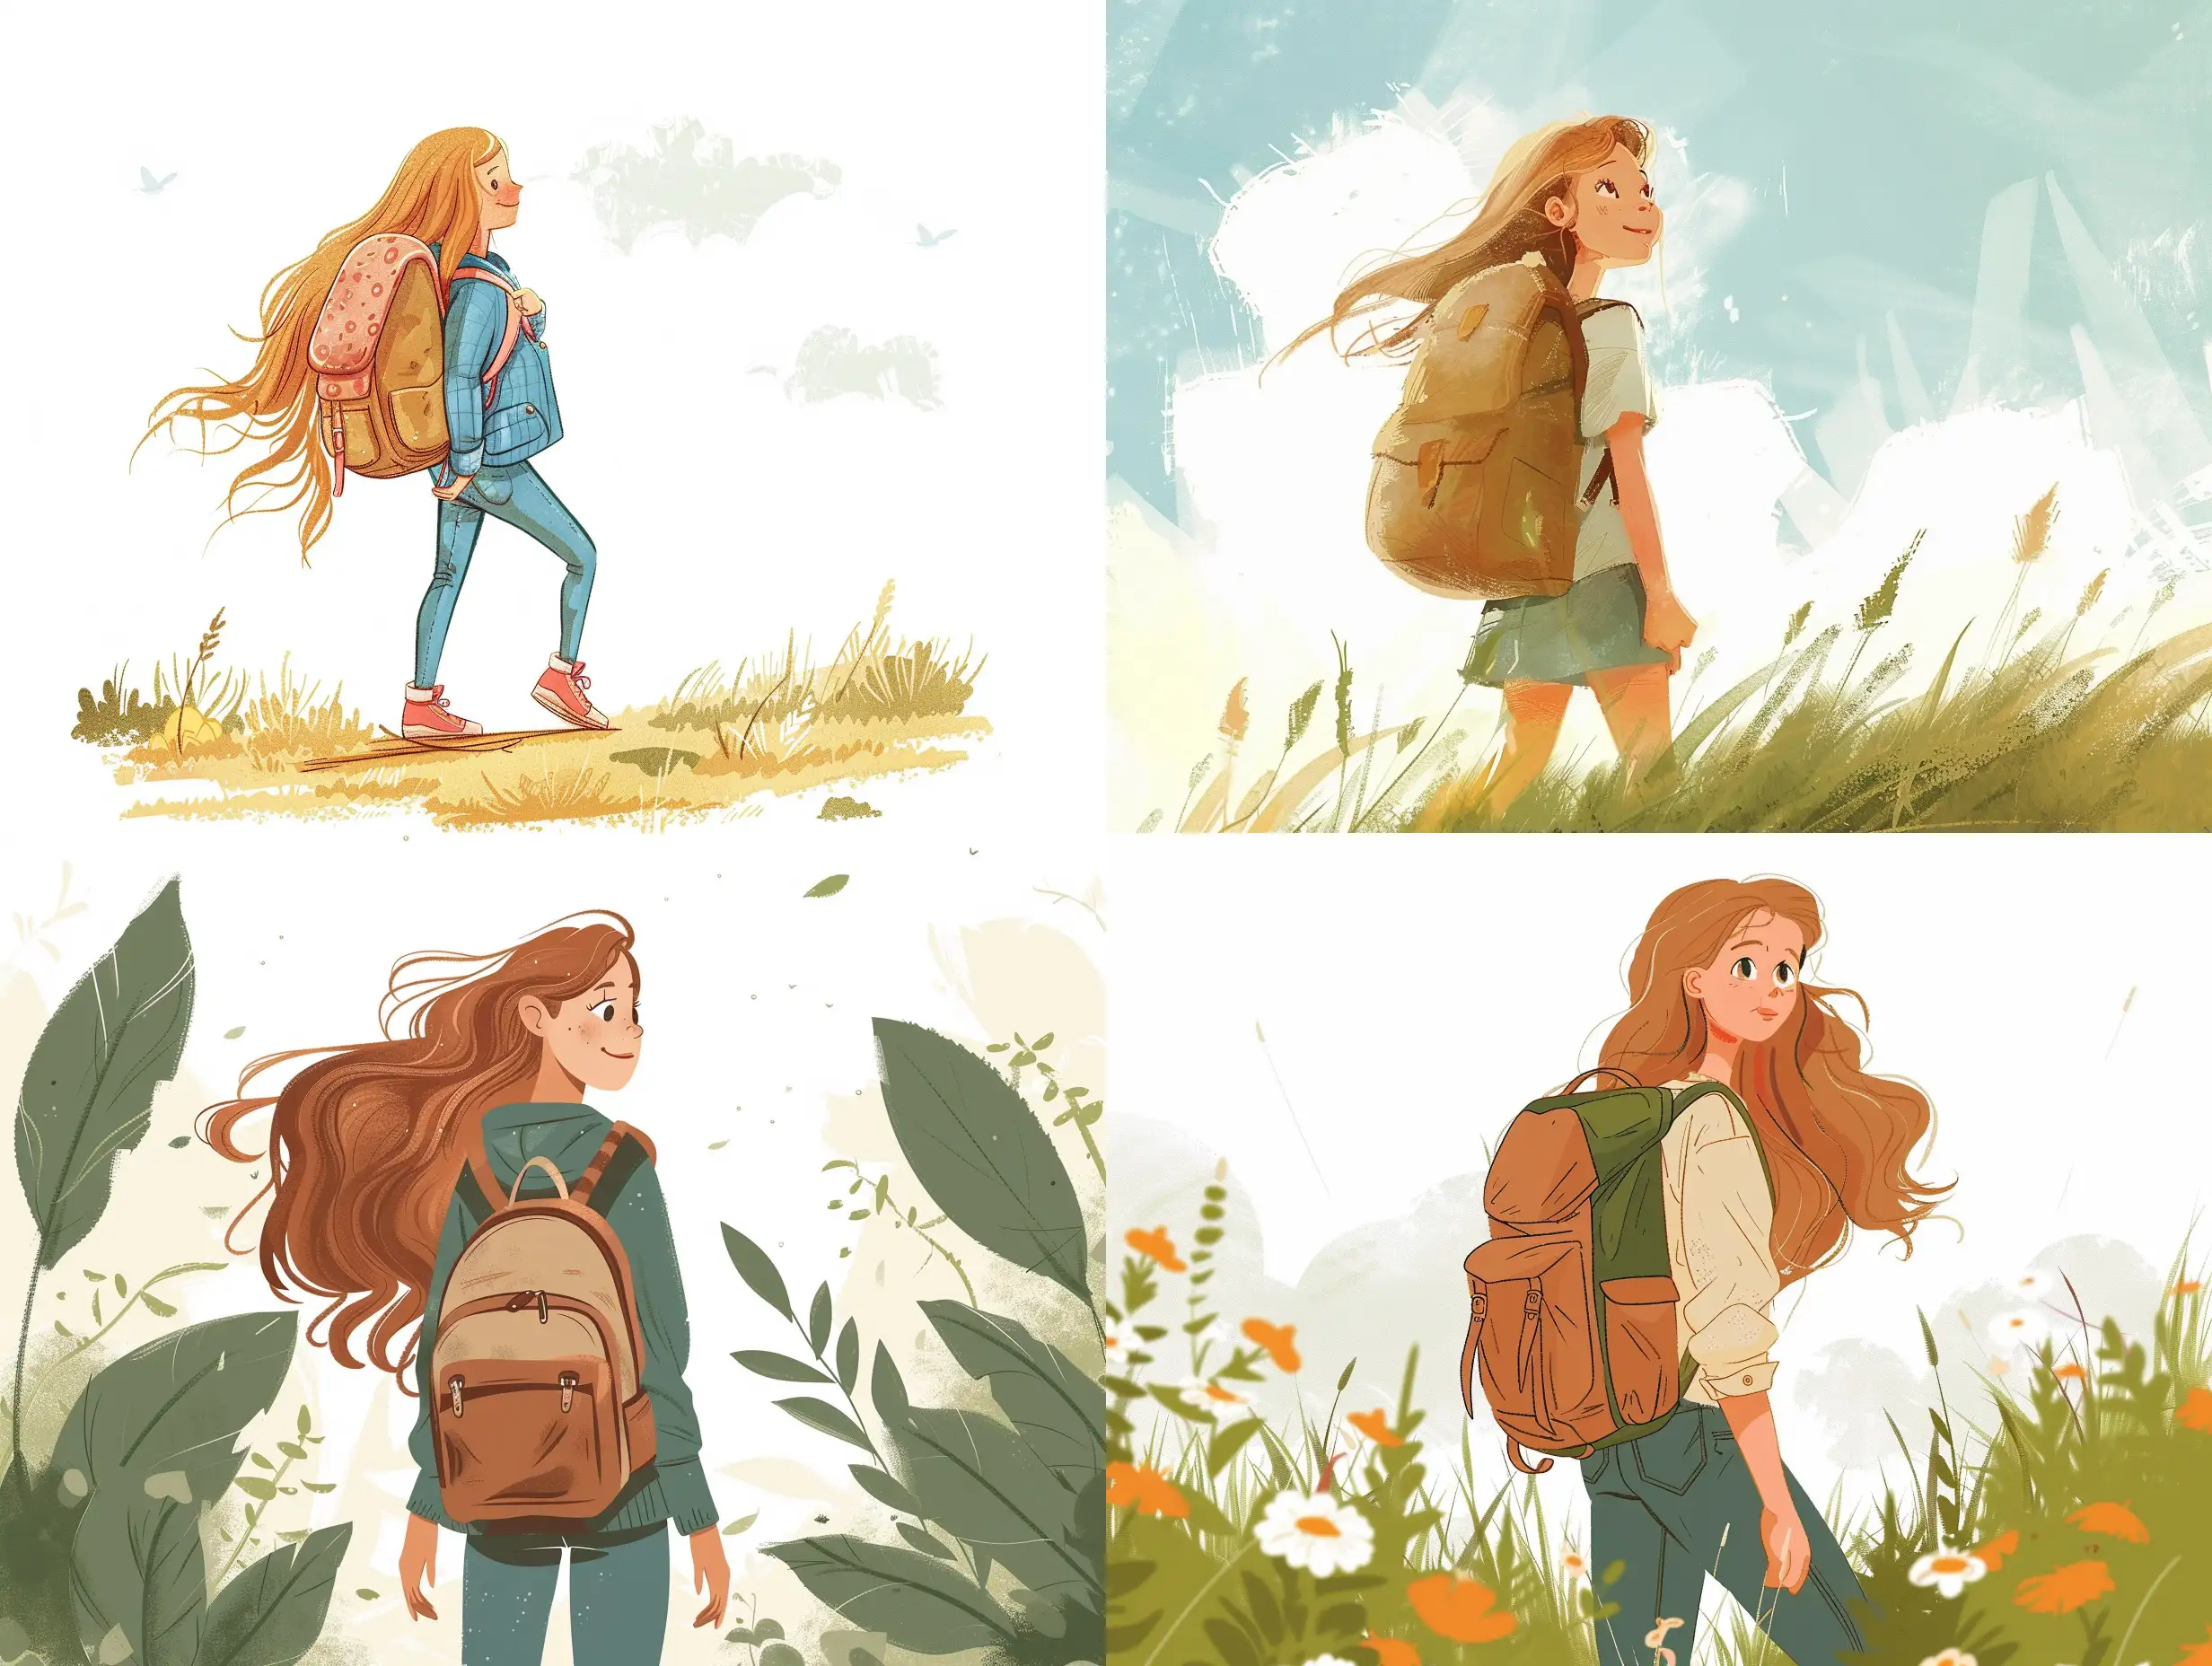 Adventurous-7YearOld-Girl-with-Backpack-Explores-Fairytale-World